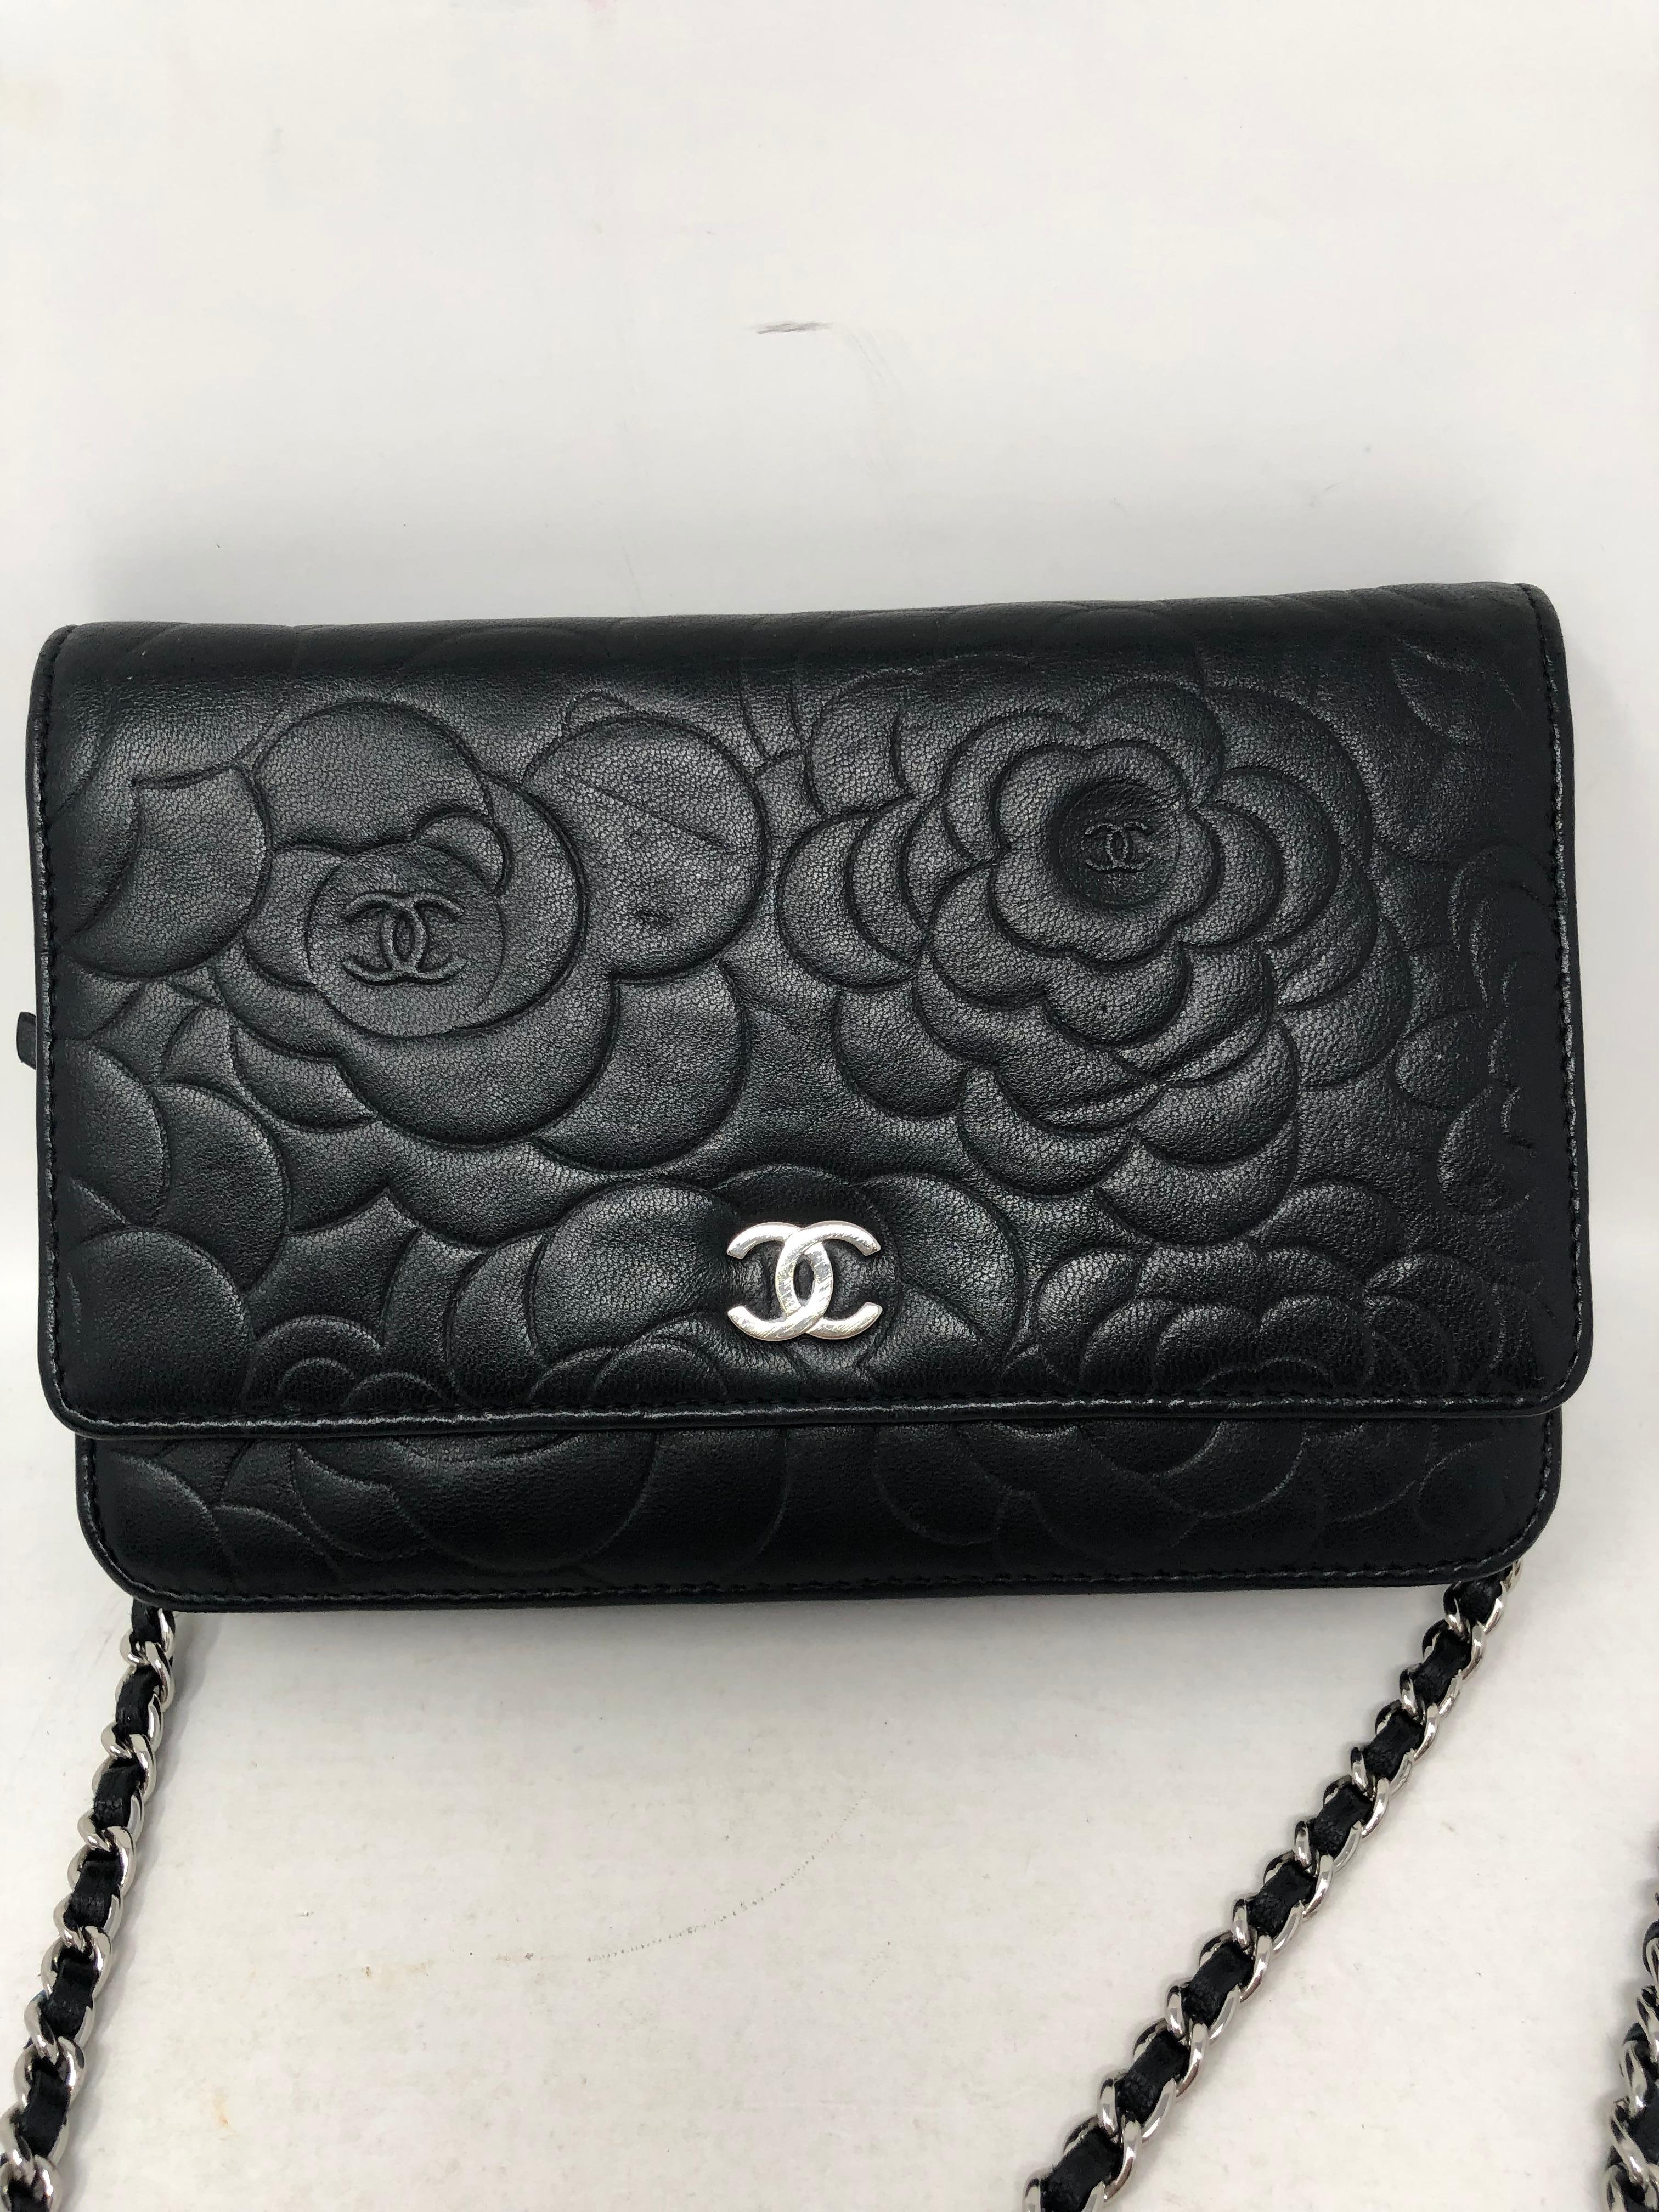 Chanel Black Camelia Wallet On A Chain. Silver hardware. Can be worn as a clutch or crossbody. A few indentations from wear. Good condition otherwise. Soft lambskin leather. Guaranteed authentic. 